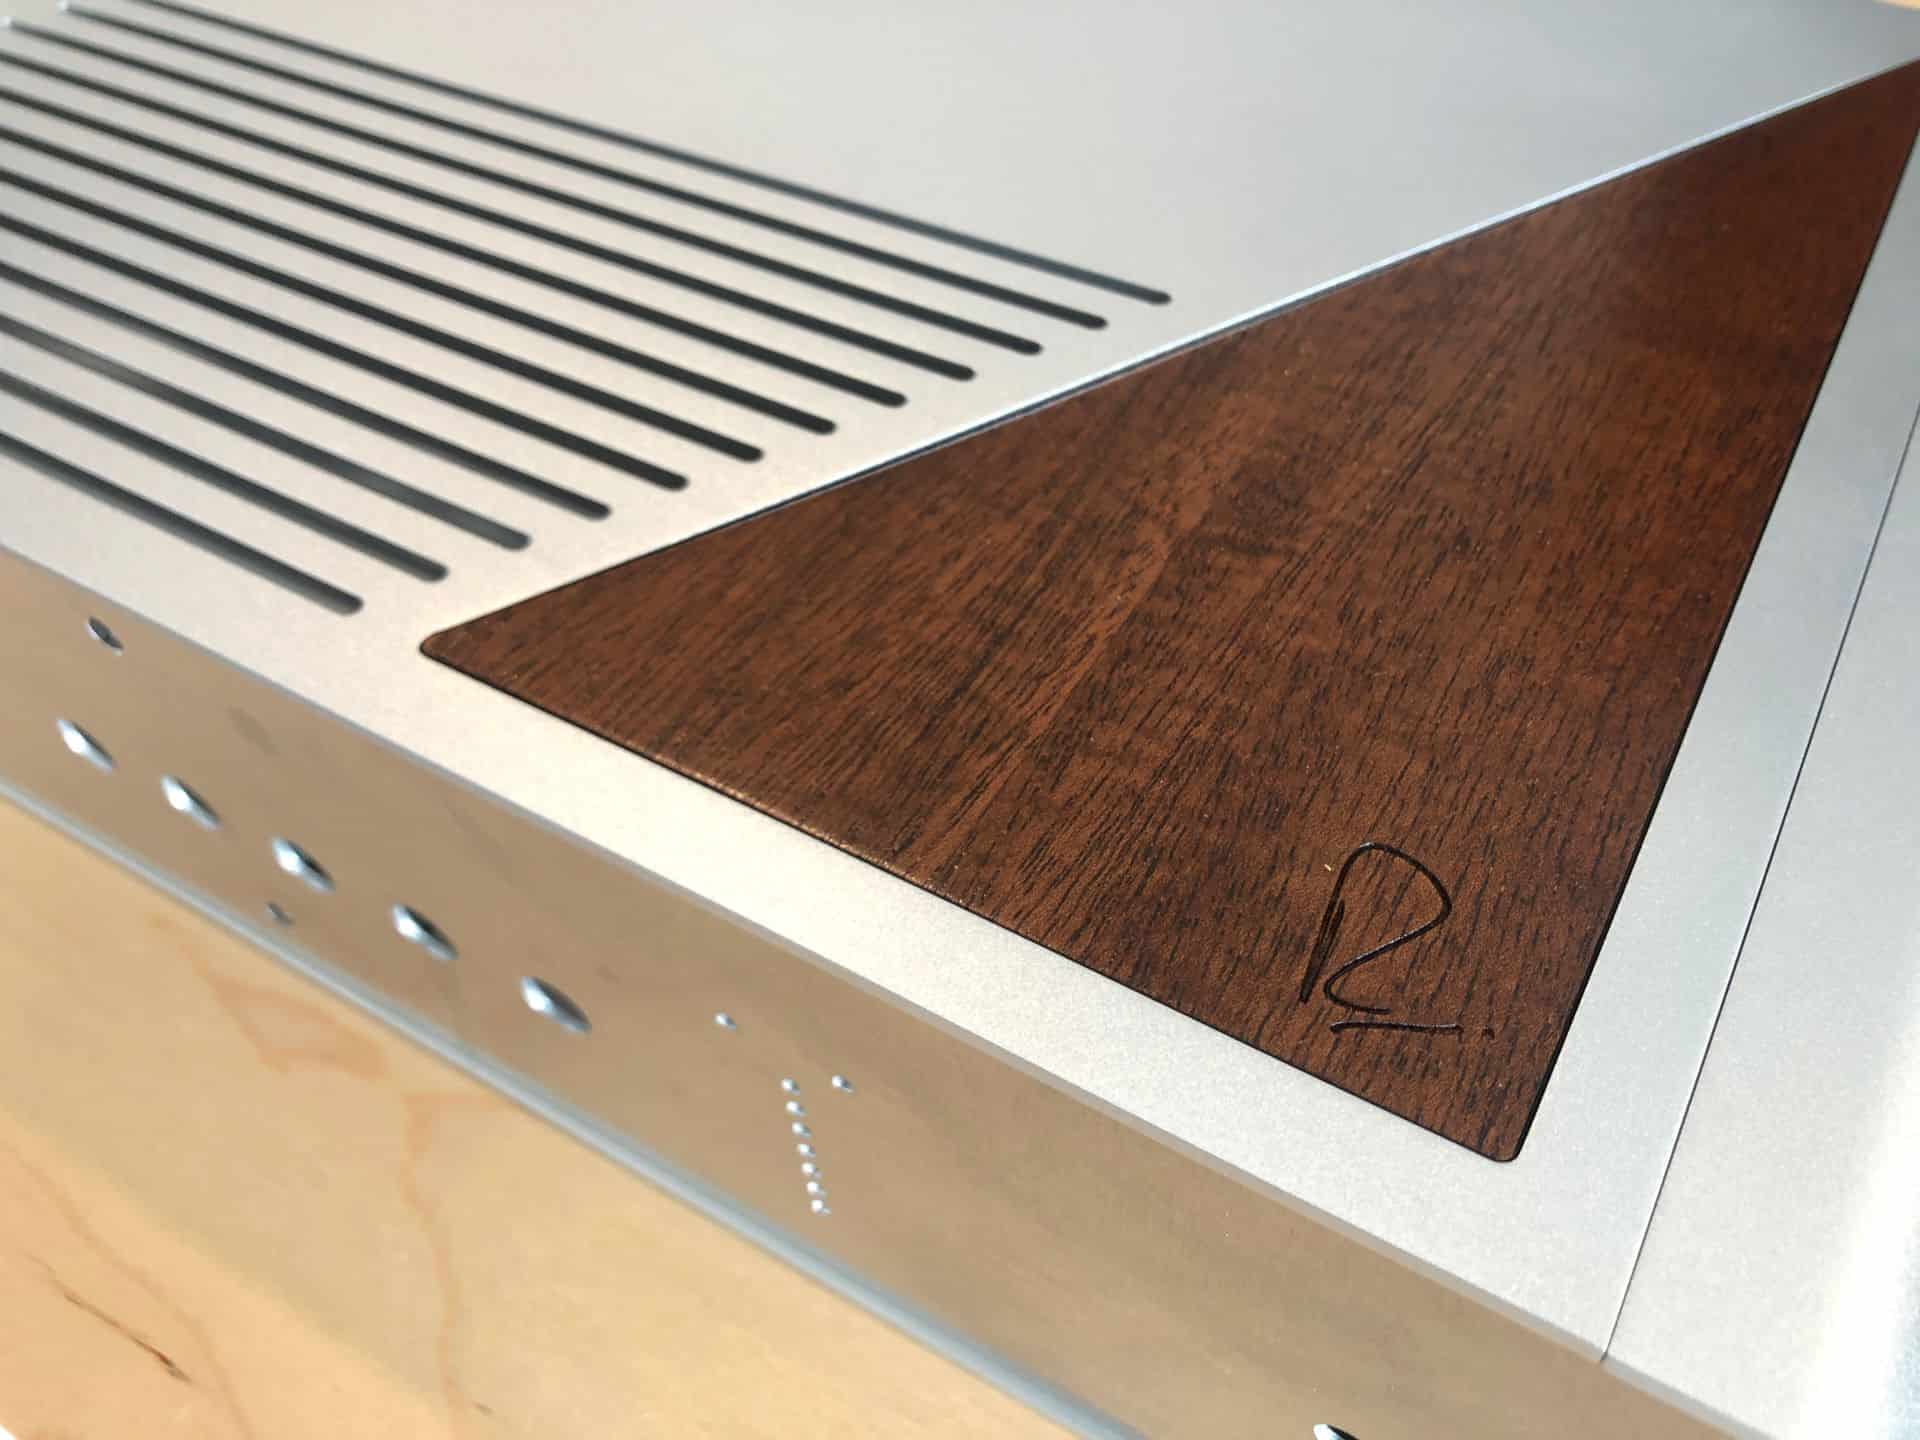 Close up of the wood insert on the Rupert Neve Design DAC